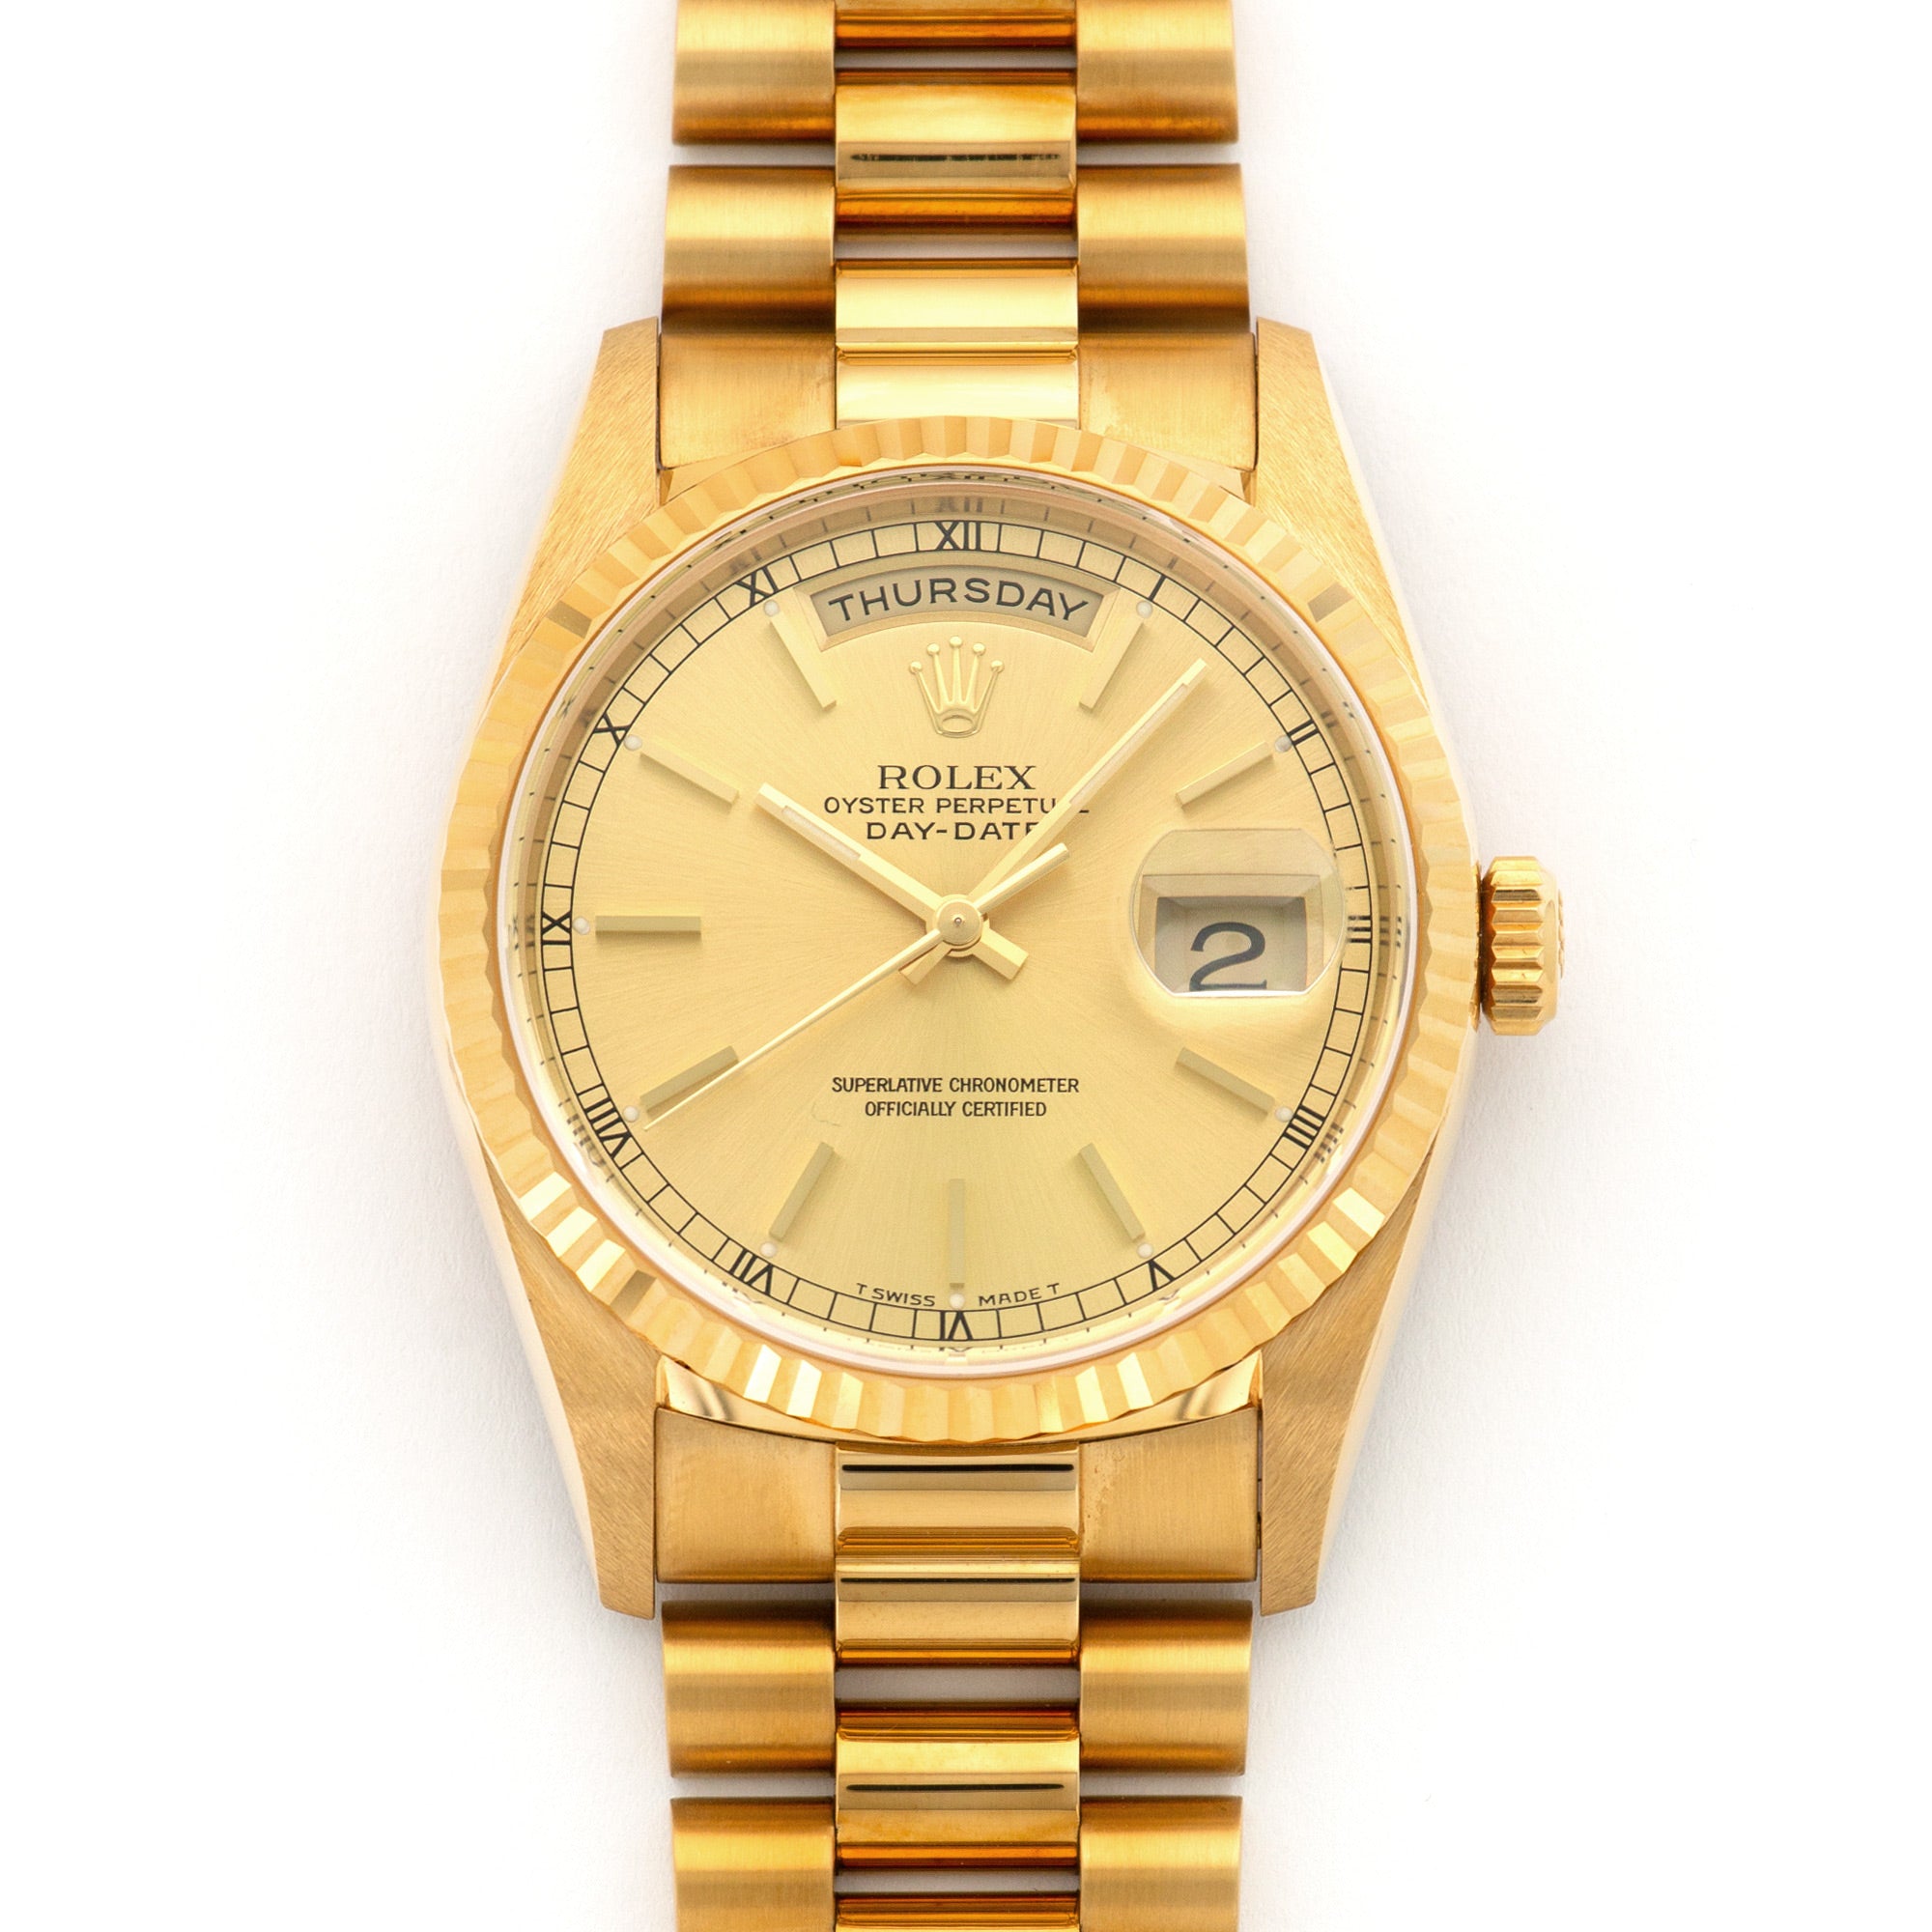 Rolex - Rolex Yellow Gold Day-Date Watch Ref. 18238 in New Old Stock Condition - The Keystone Watches